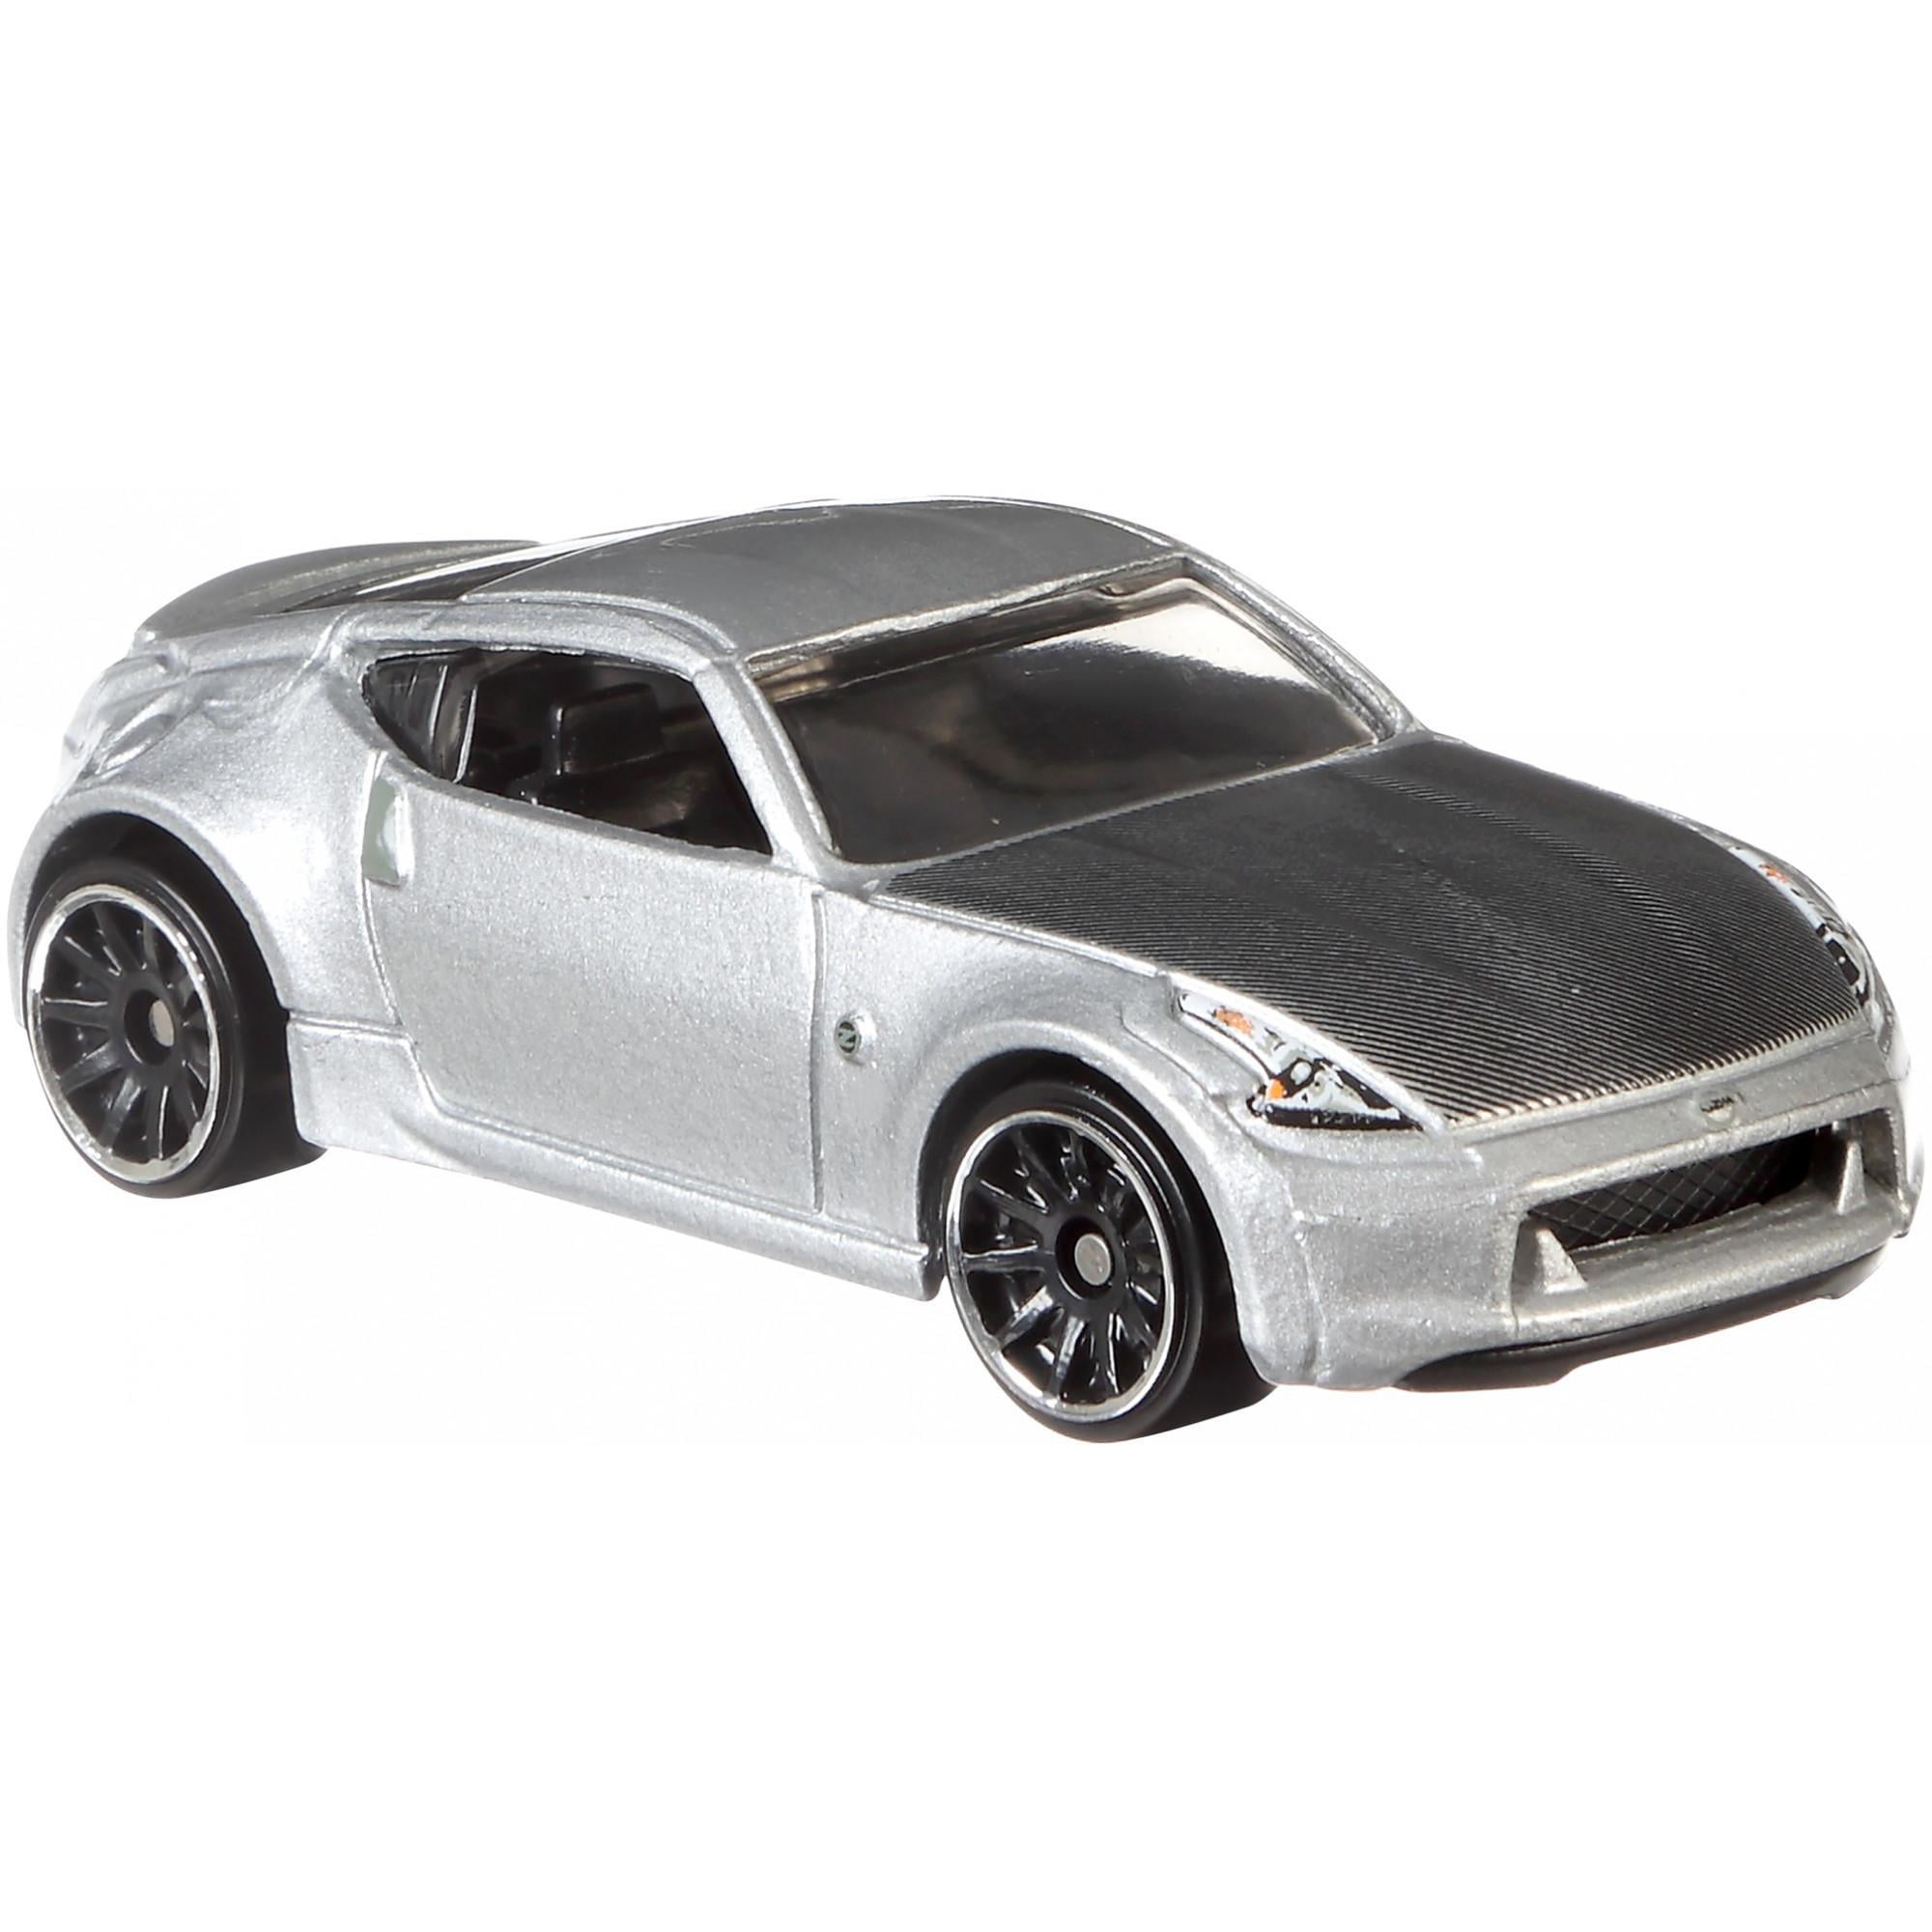 HOT WHEEELS 2019 FAST & FURIOUS NISSAN 370Z #5/6 SILVER